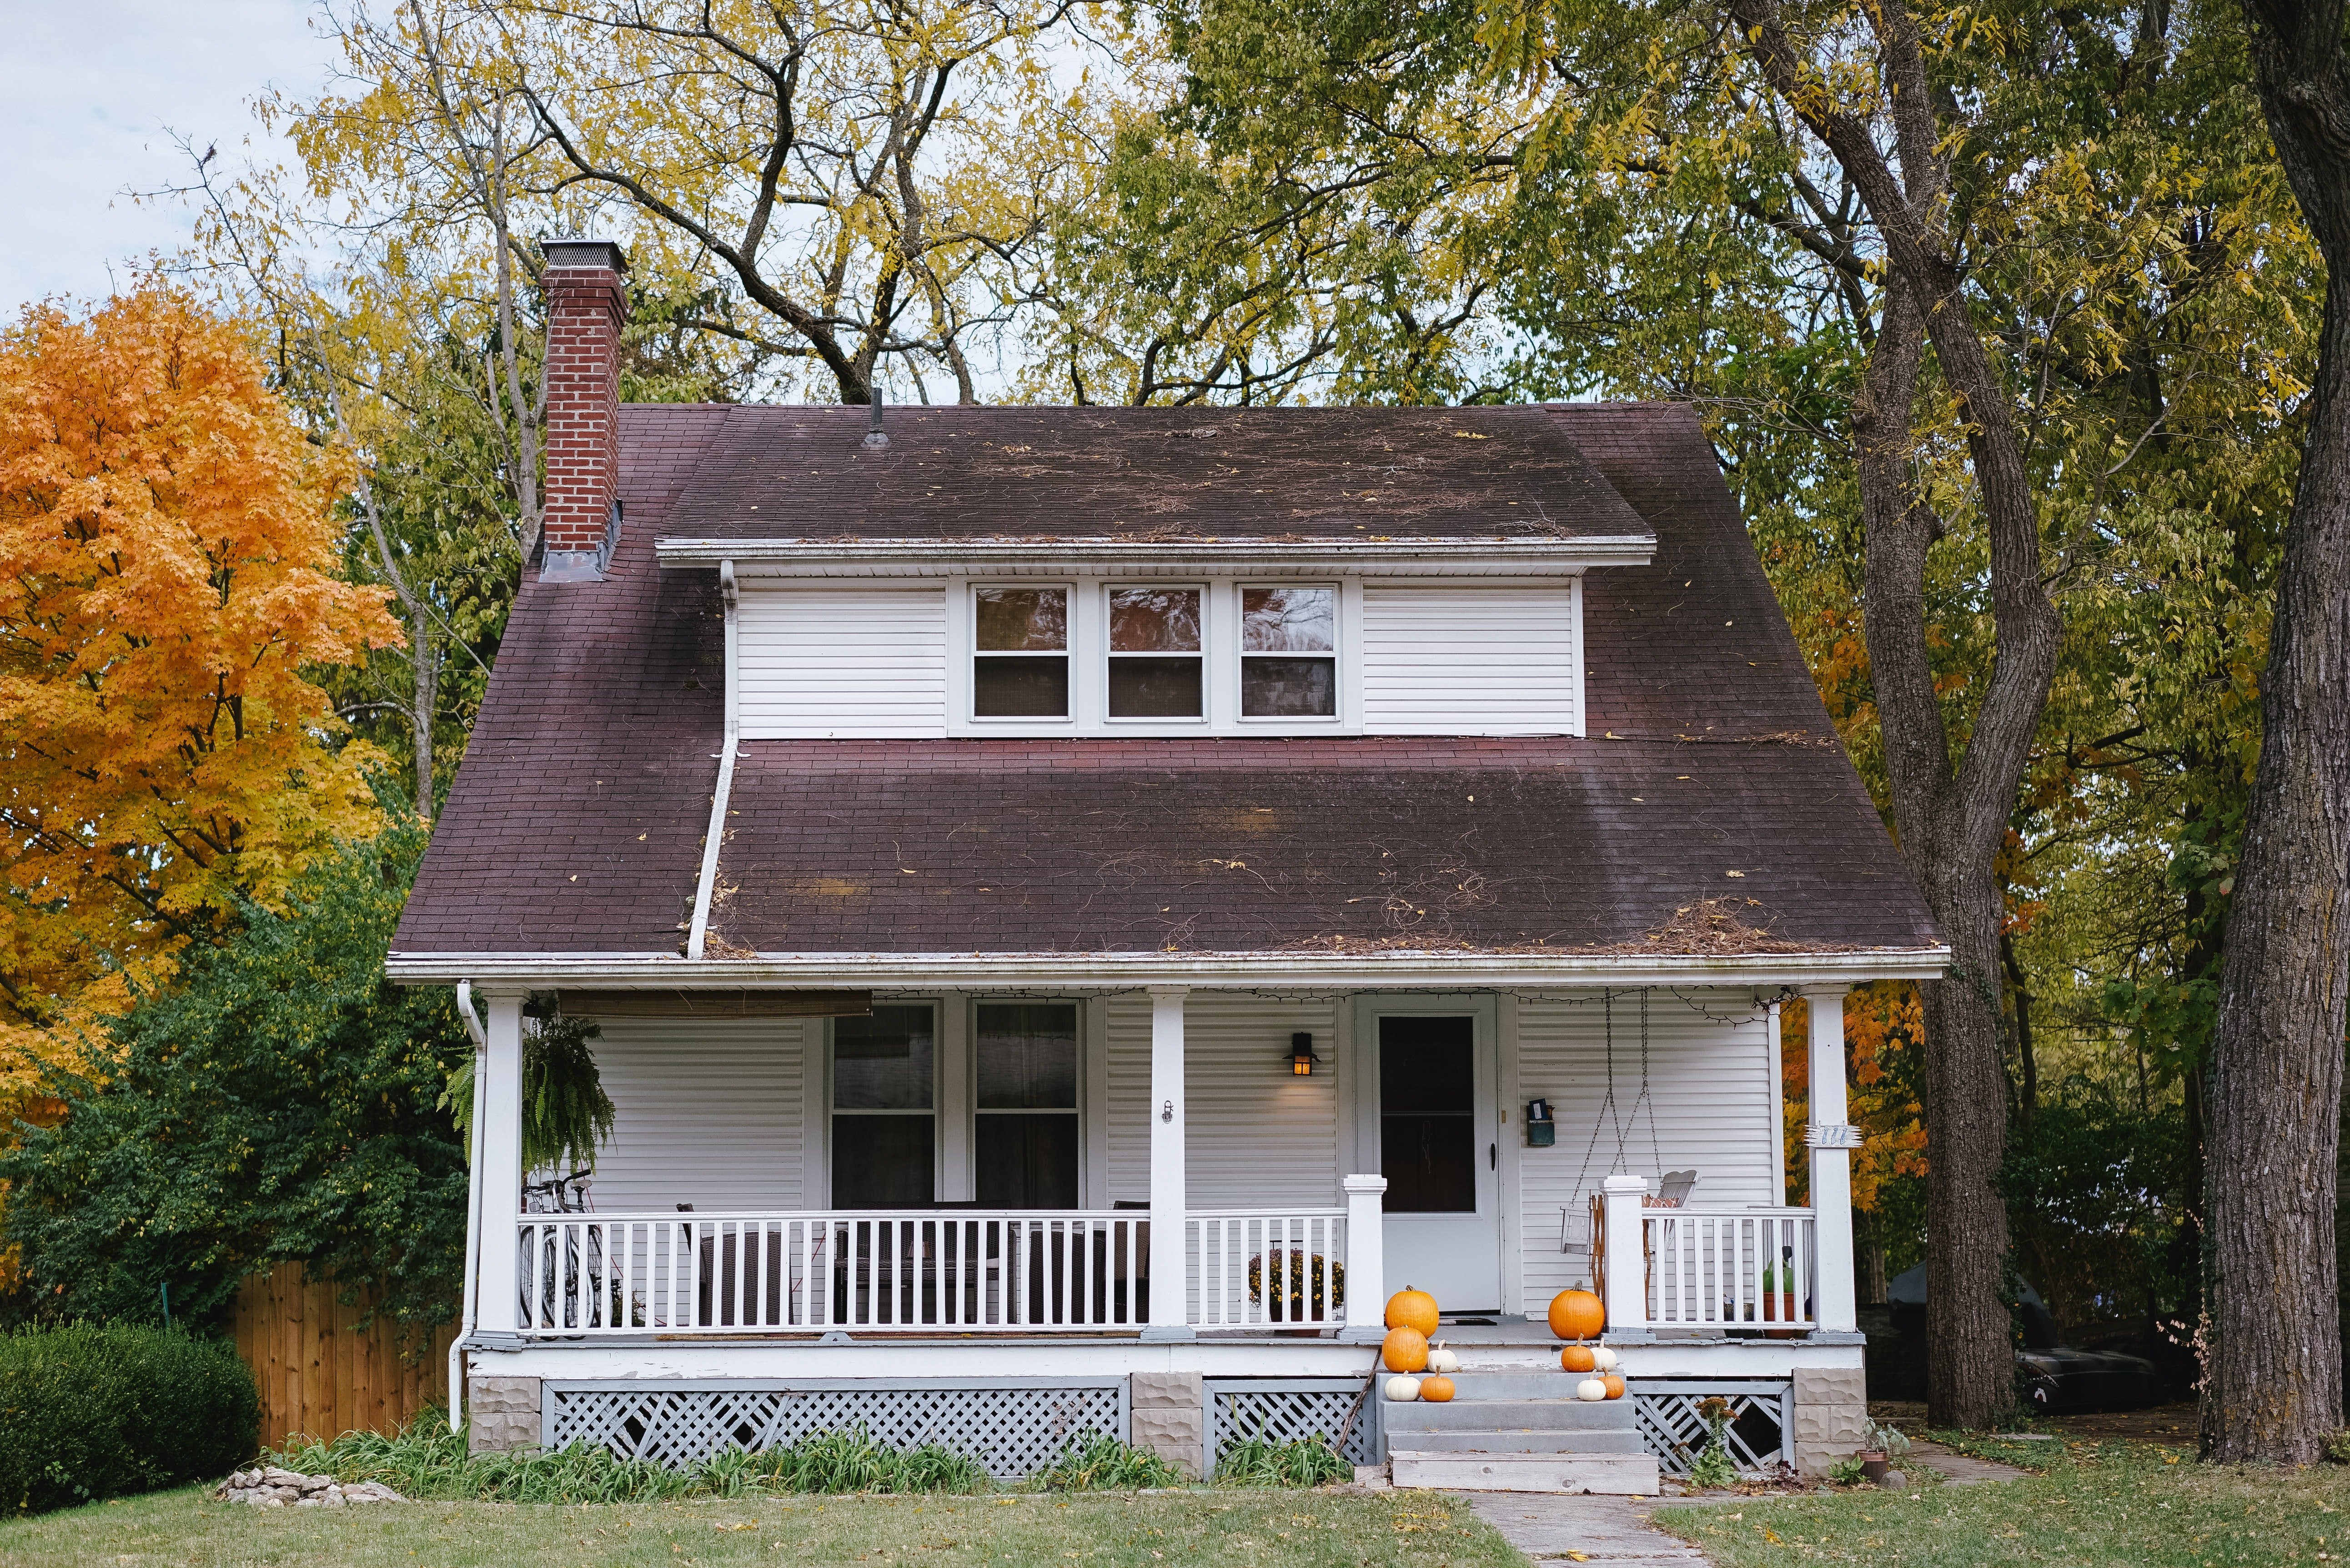 HGTV star Cristy Lee helped a Detroit, Michigan couple renovate a home just like this one.